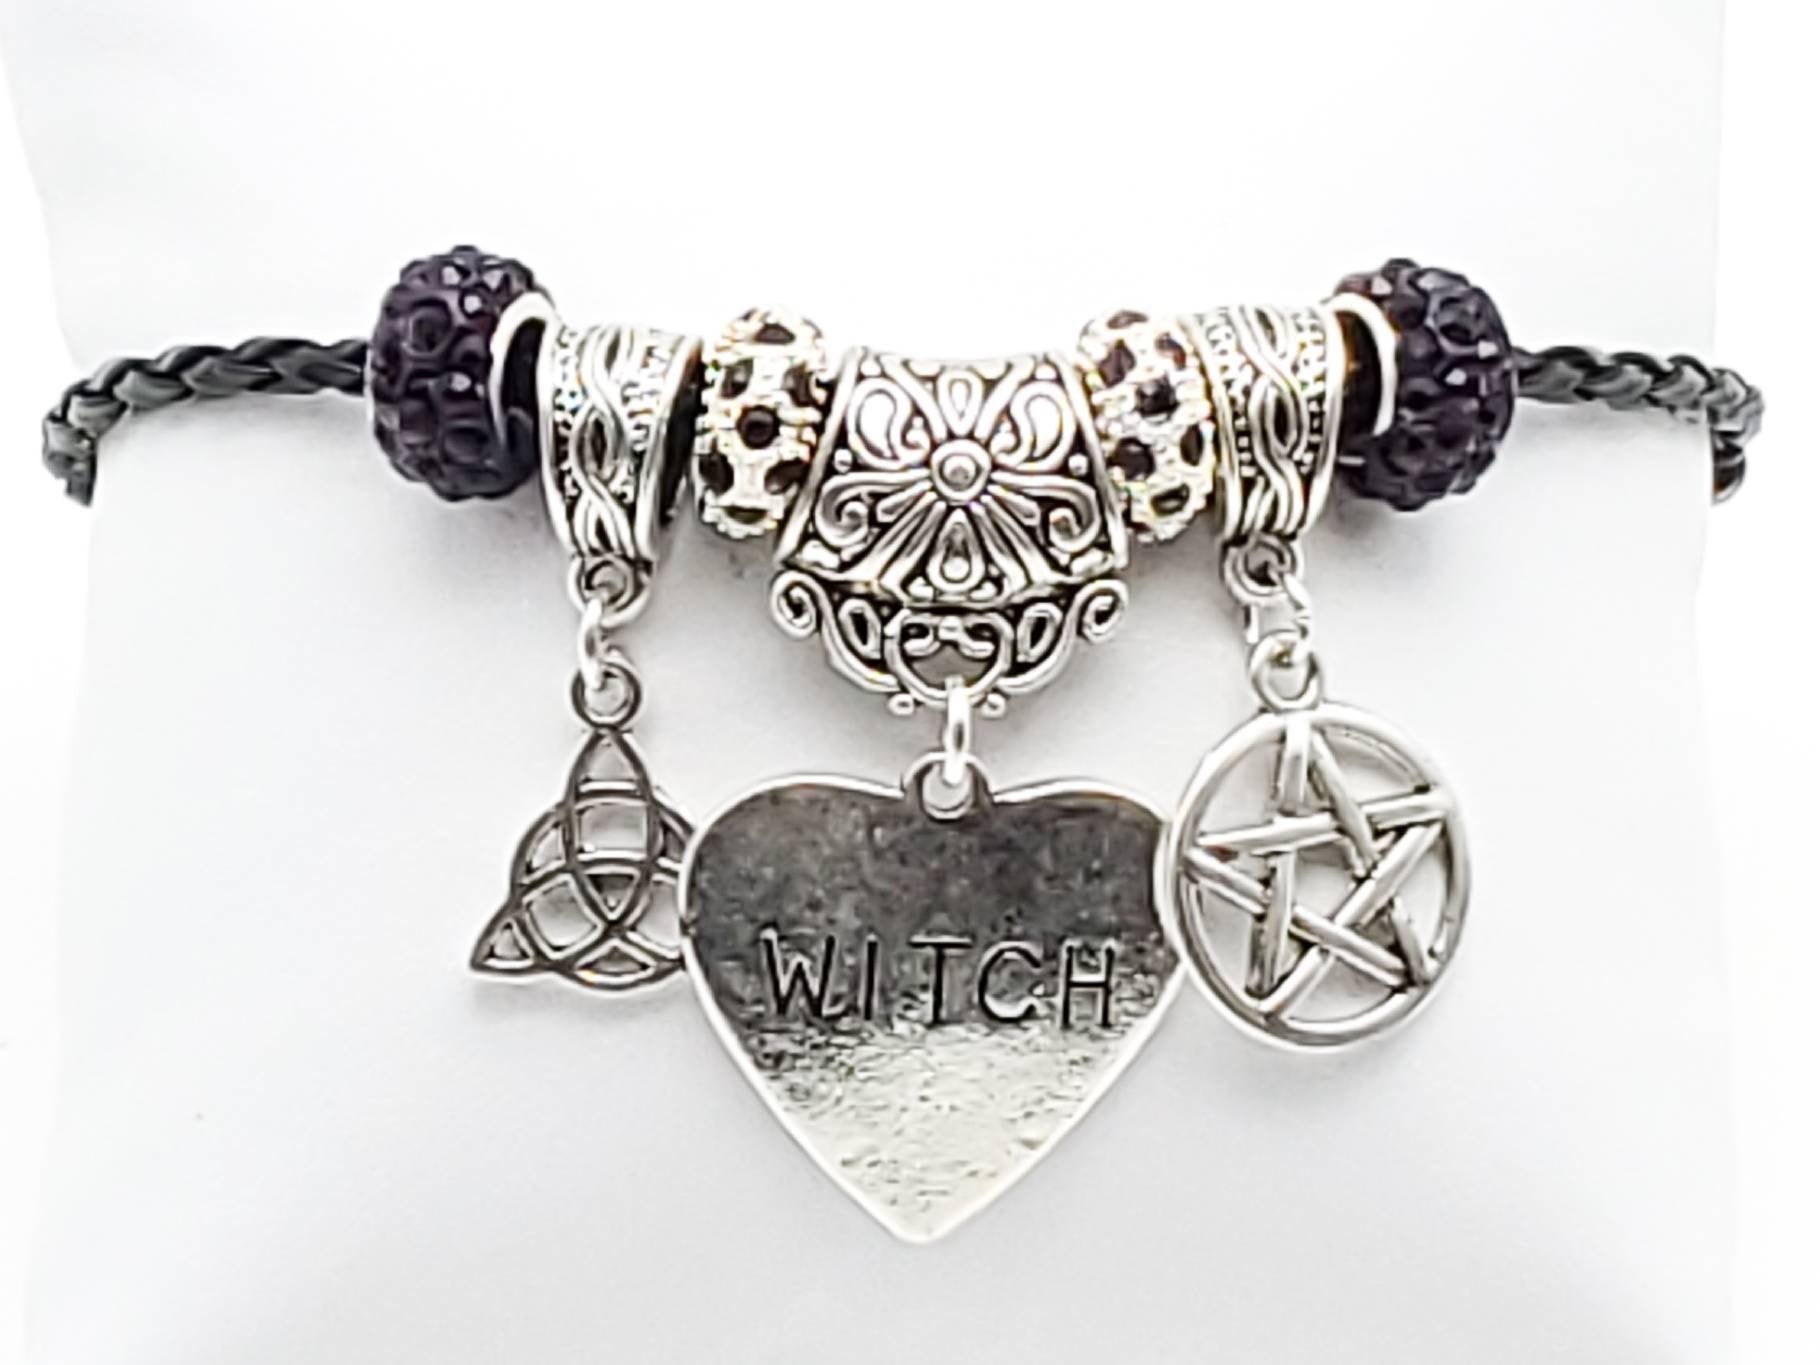 Black Leather Bracelet with Triquera, Pentacle and WITCH Heart Charms - The Caffeinated Raven